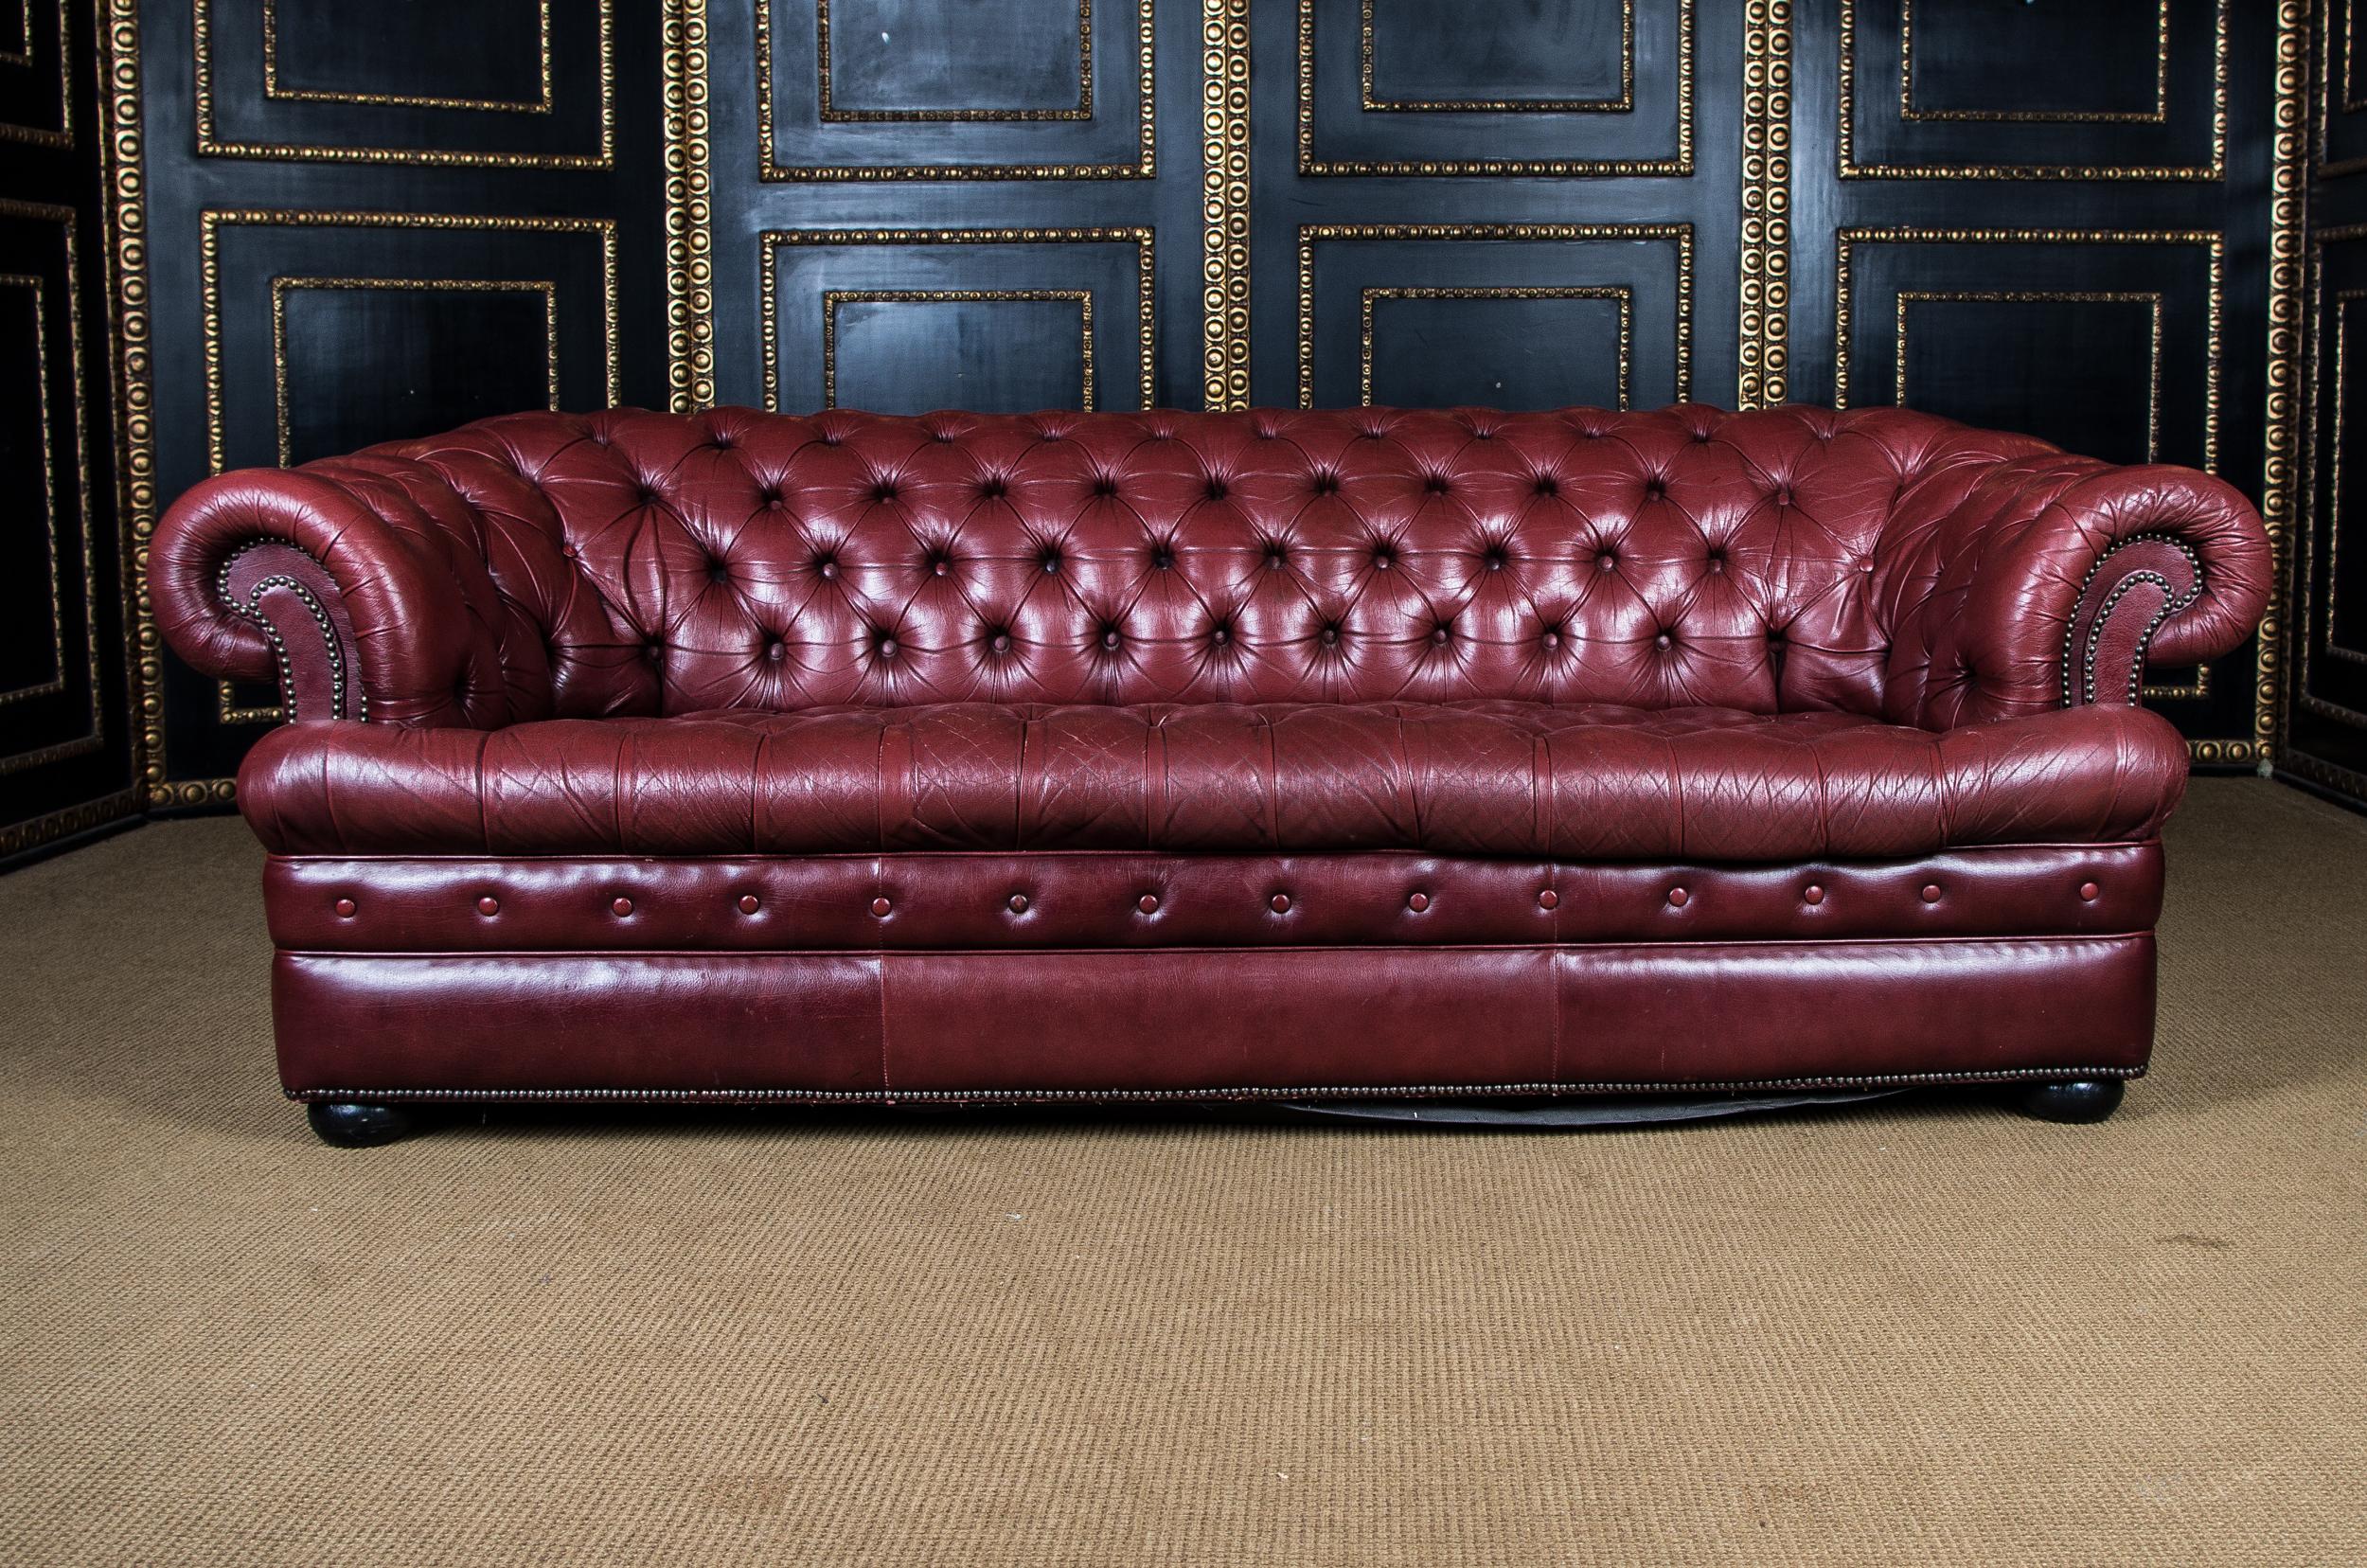 The Chesterfield sofa is made of real estate, made of genuine leather from the Chesterfield brand.

Very rare to buy and in this absolute top quality. Seat also buttoned.
This sofa is 100% original and no cheap import from China. Who owns, does